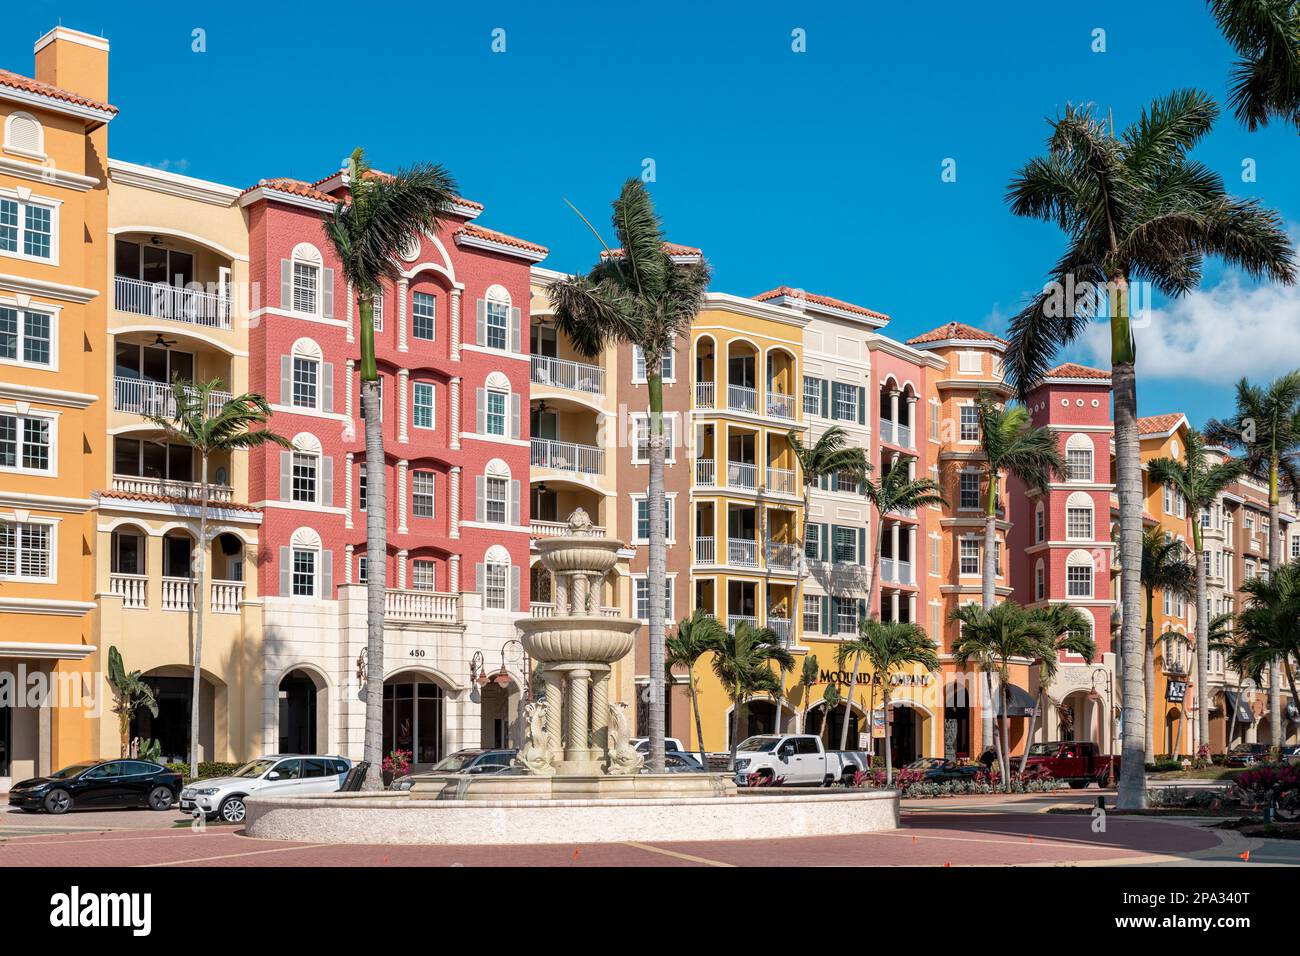 Bayfront shops and condominiums on the waterfront, Naples, Florida, USA. Stock Photo